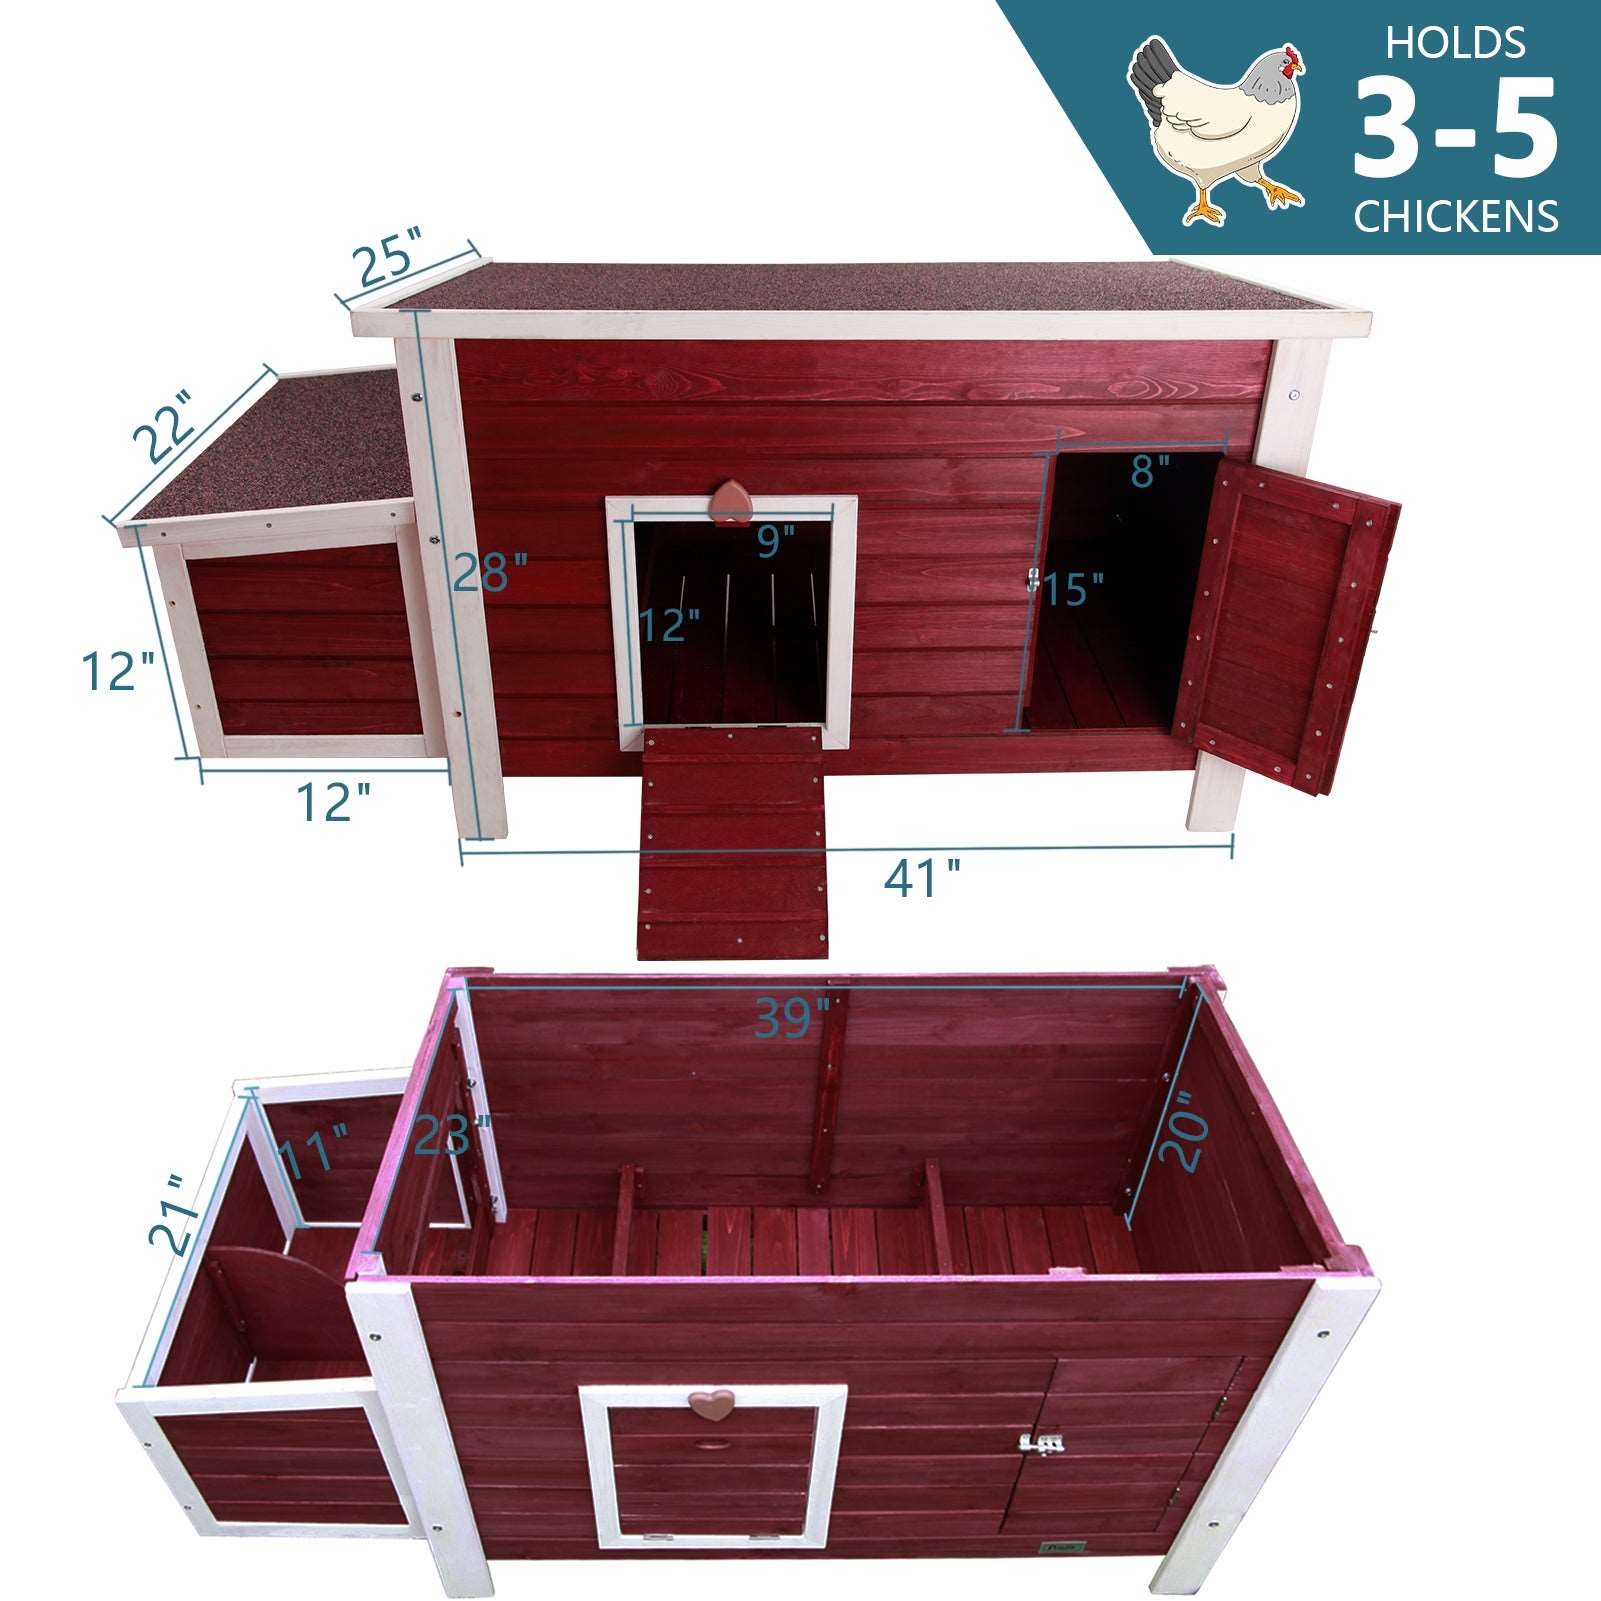 petsfit-chicken-coop-with-nesting-box-outdoor-hen-house-with-removable-bottom-for-easy-cleaning-weatherproof-poultry-cage-rabbit-hutch-wood-duck-house-red-02